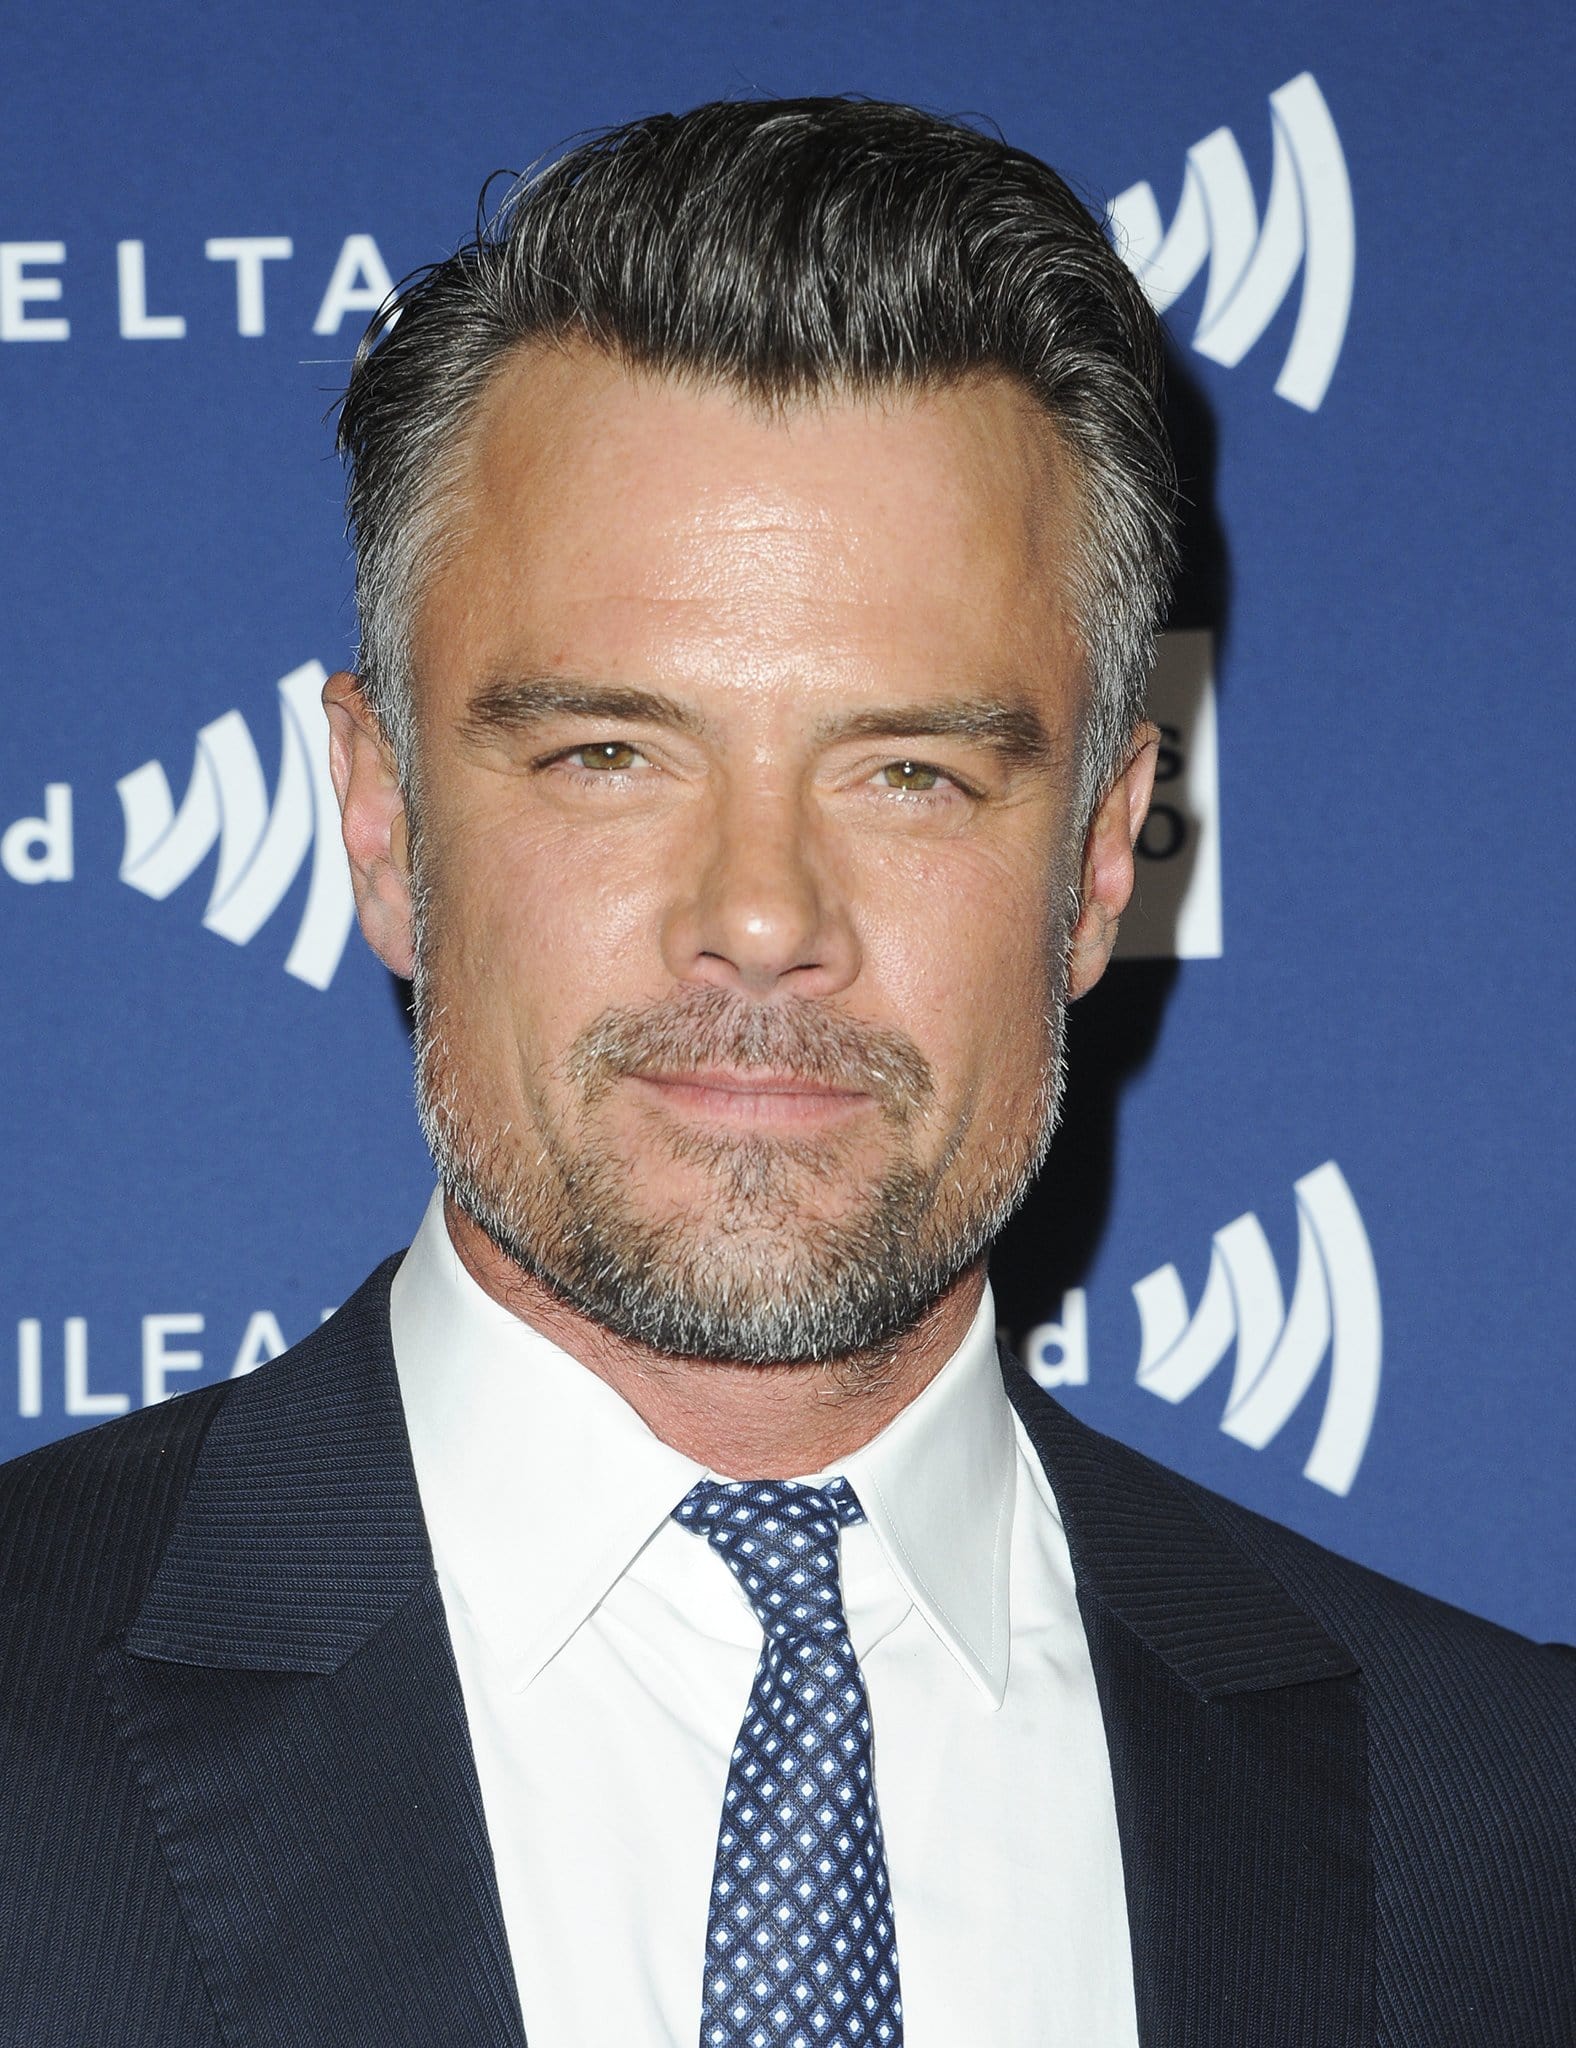 Josh Duhamel began his career as an extra in music videos before making his big-screen debut in the 2004 movie Win a Date with Tad Hamilton